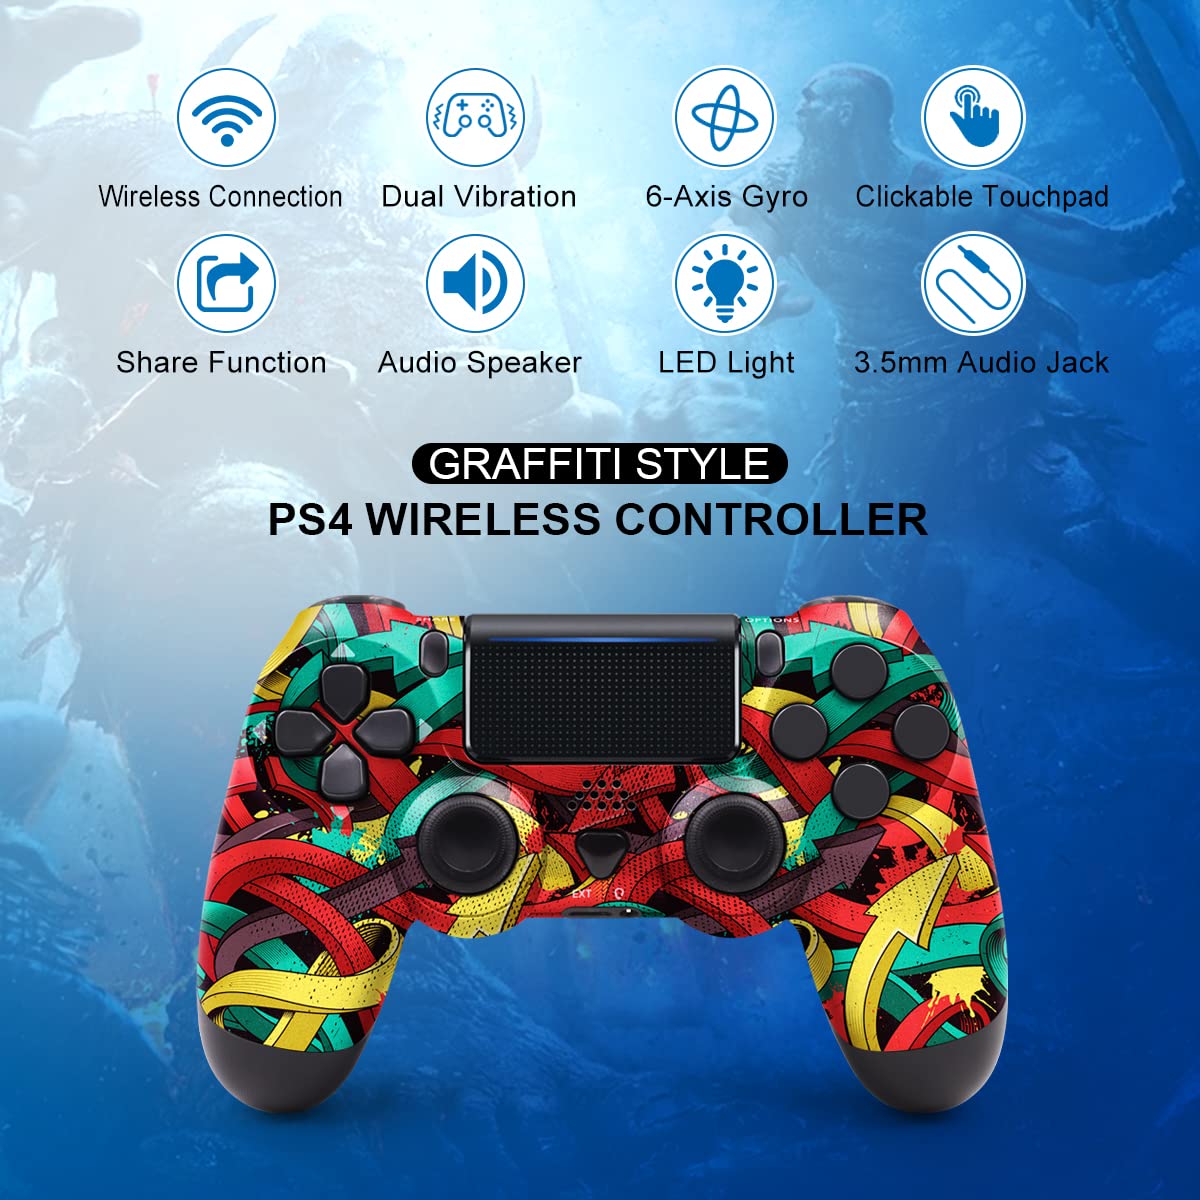 MOOGOLE PS4 Controller Wireless, with USB Cable/1000mAh Battery/Dual Vibration/6-Axis Motion Control/3.5mm Audio Jack/Multi Touch Pad/Share Button, PS4 Controller Compatible with PS4/Slim/Pro/PC